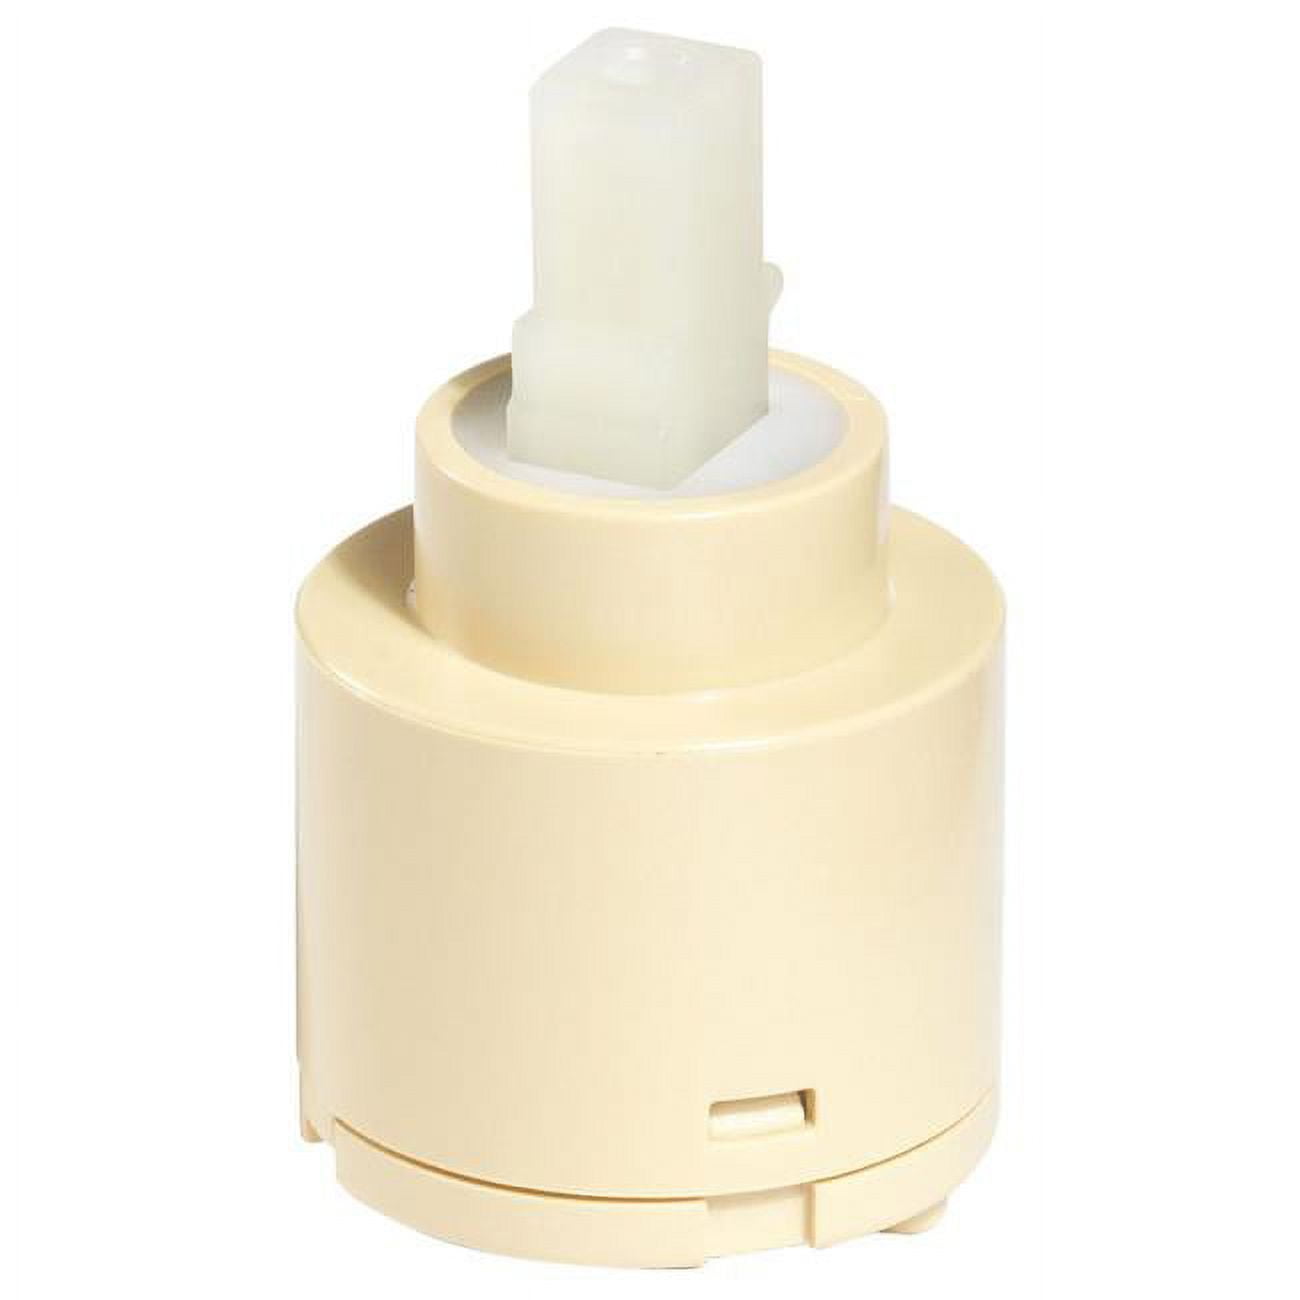 4914503 Hot & Cold Faucet Cartridge For Tucana Kitchen Faucet - Pack Of 5